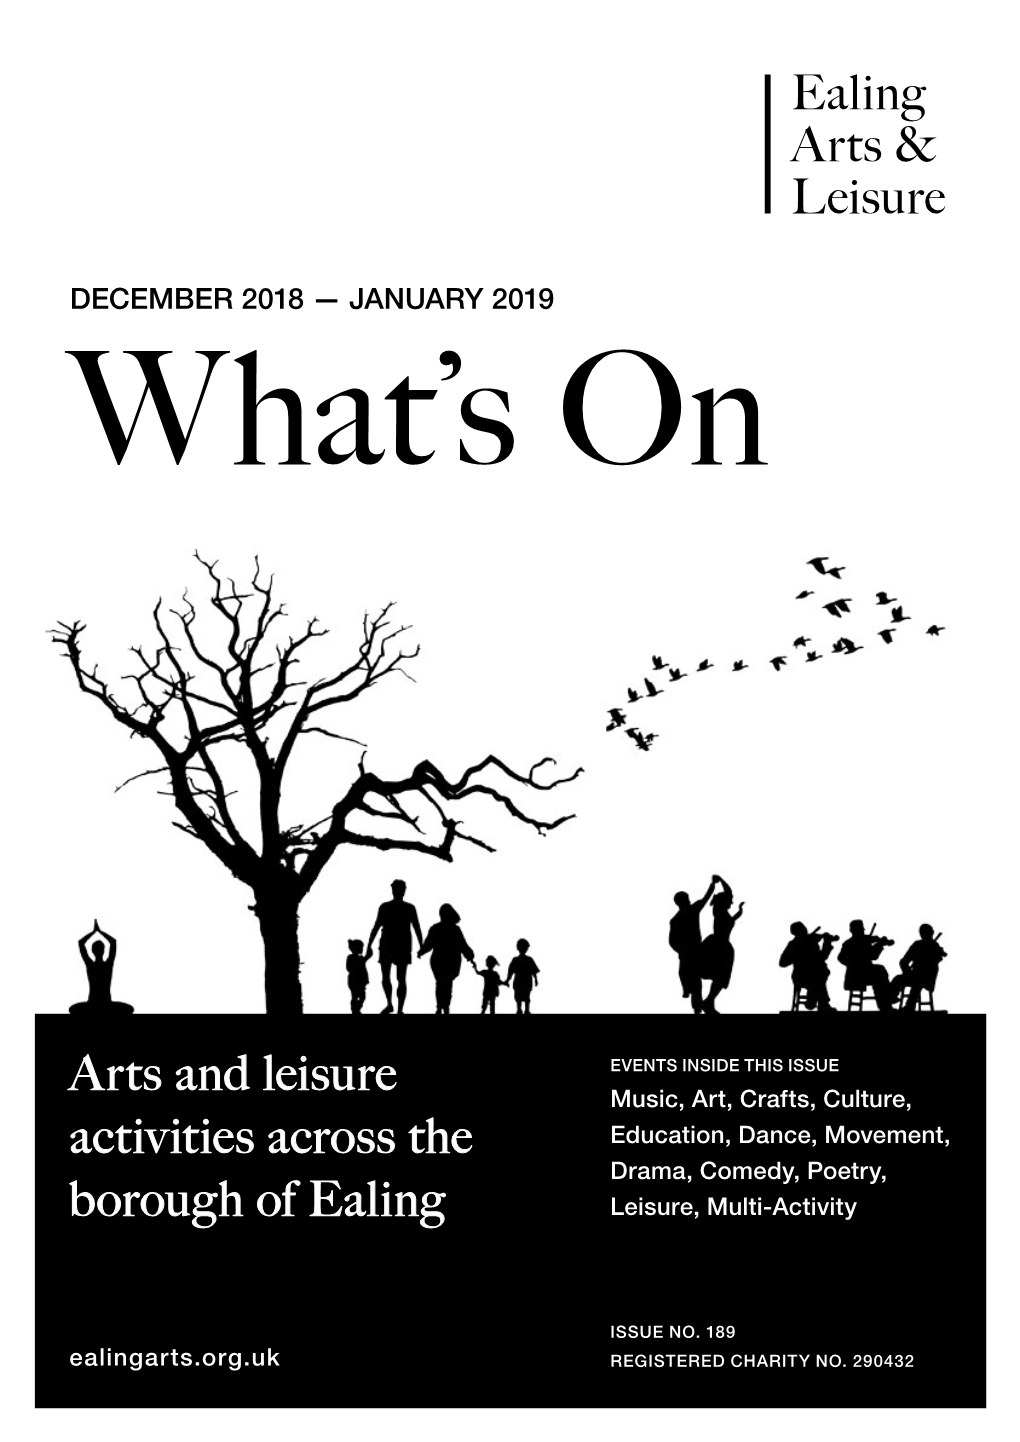 Arts and Leisure Activities Across the Borough of Ealing